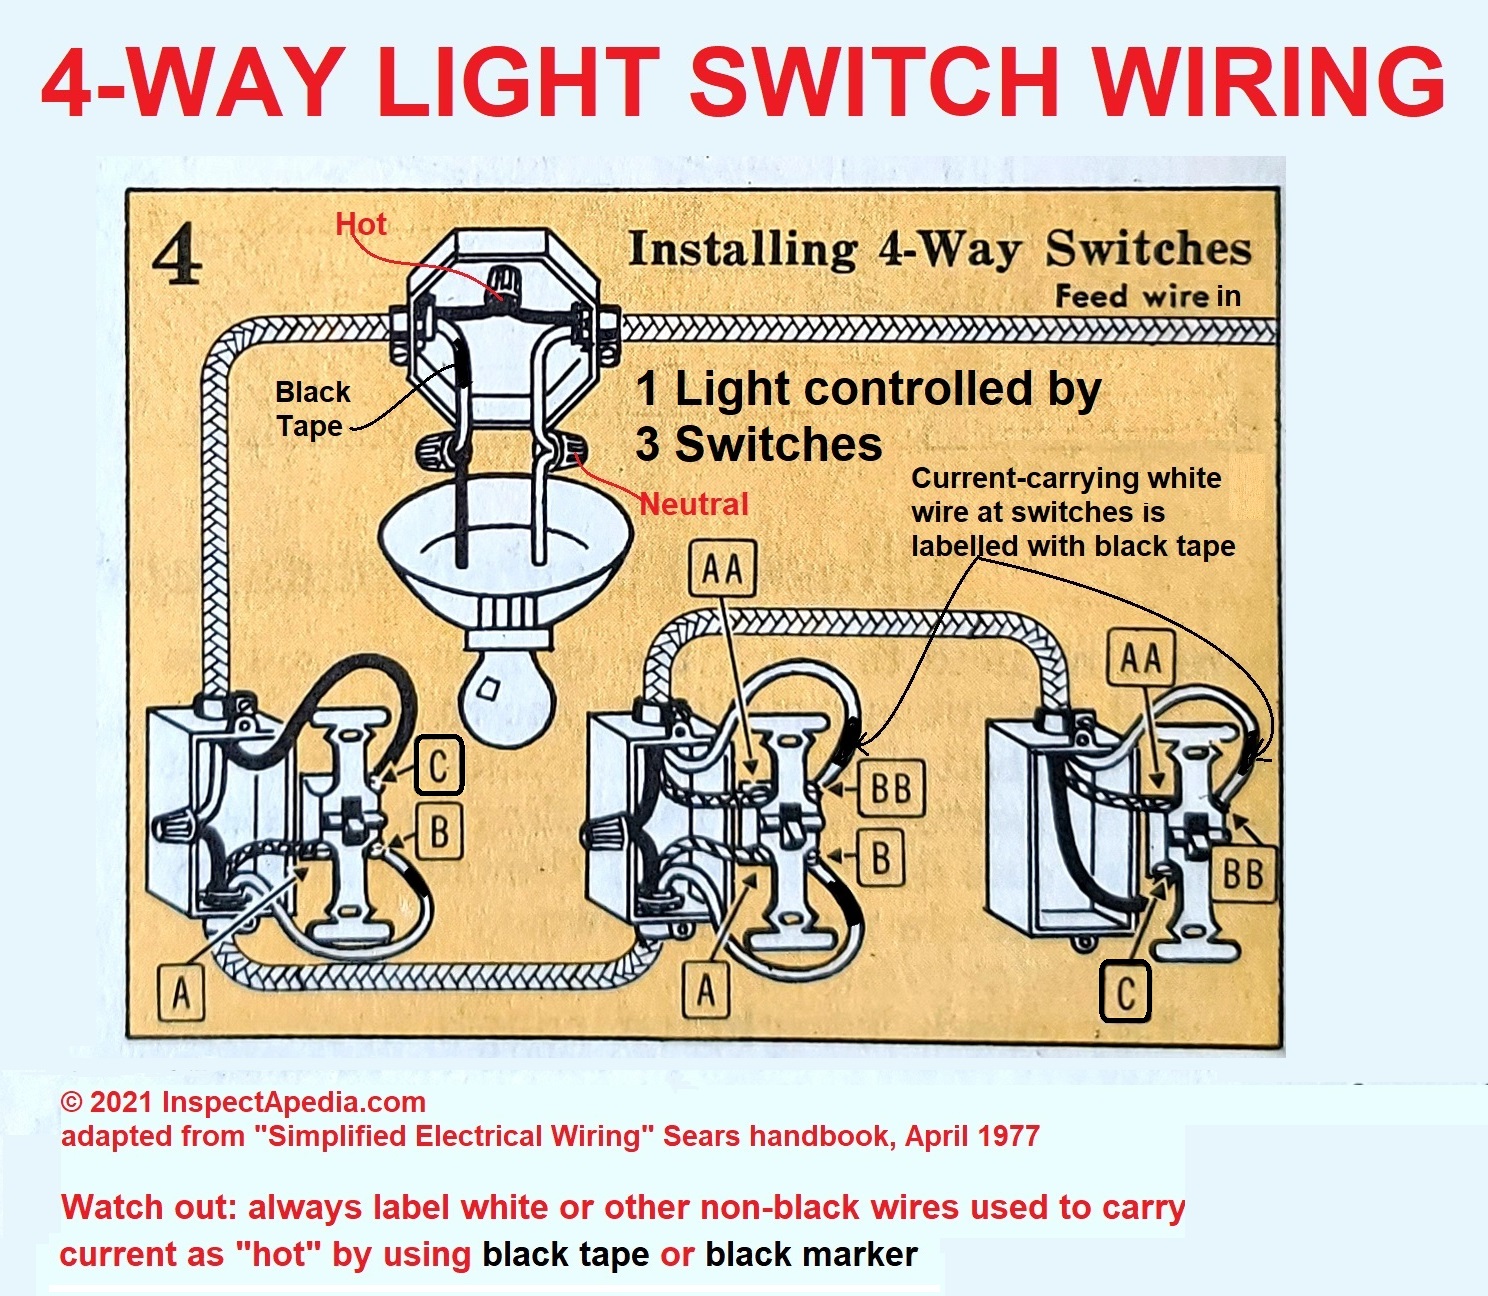 How to wire a light switch: simple switch, 3-way light switch, 4-way light  switch wiring Simple Wiring Diagram InspectAPedia.com